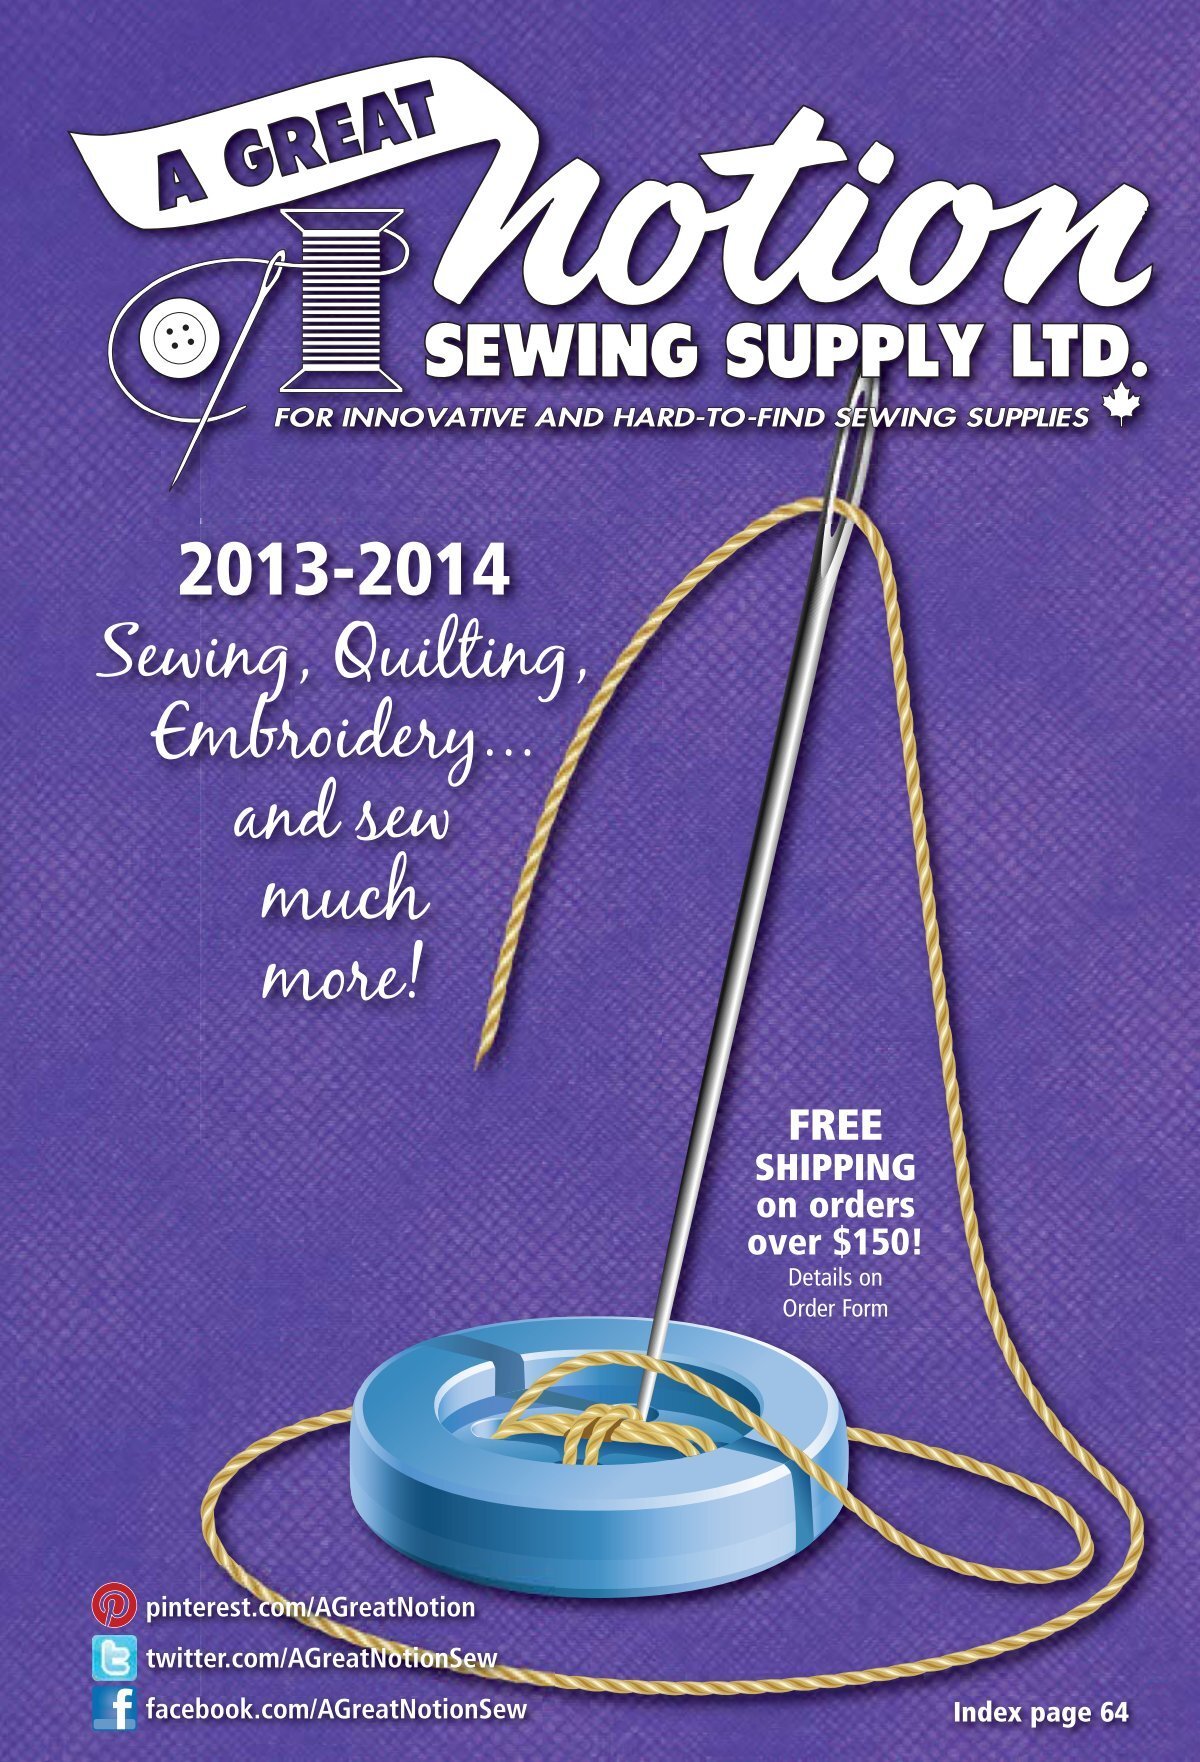 2013-2014 Sewing, Quilting, Embroidery and sew  - A Great Notion